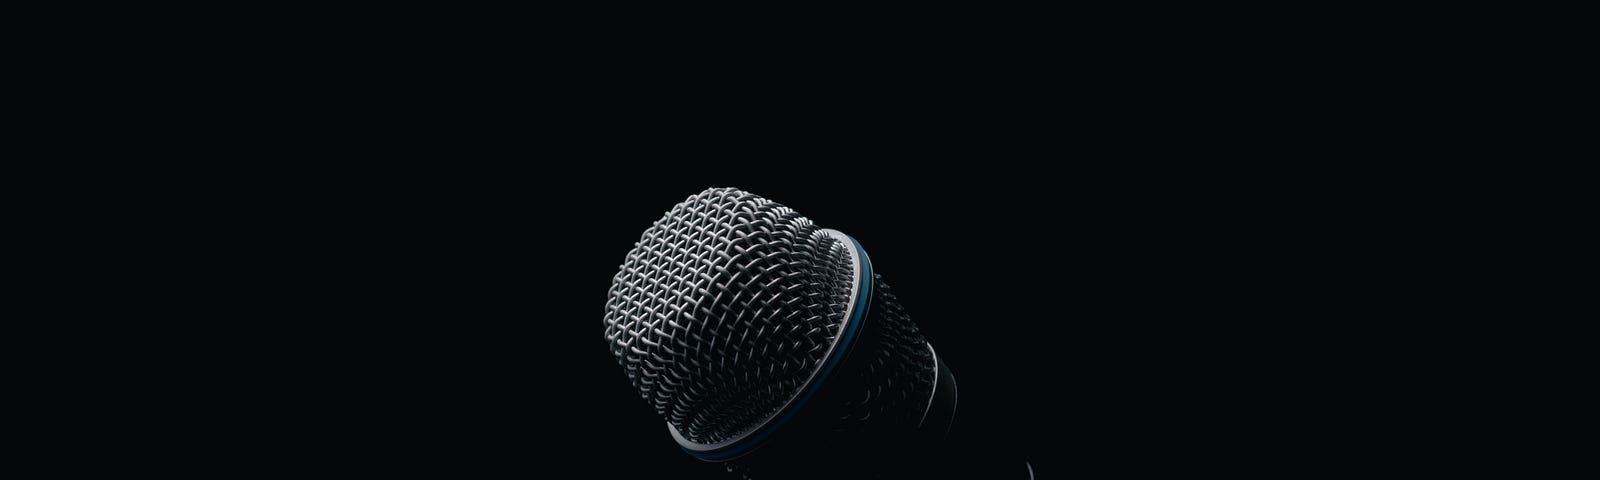 A microphone on a stage with a black background